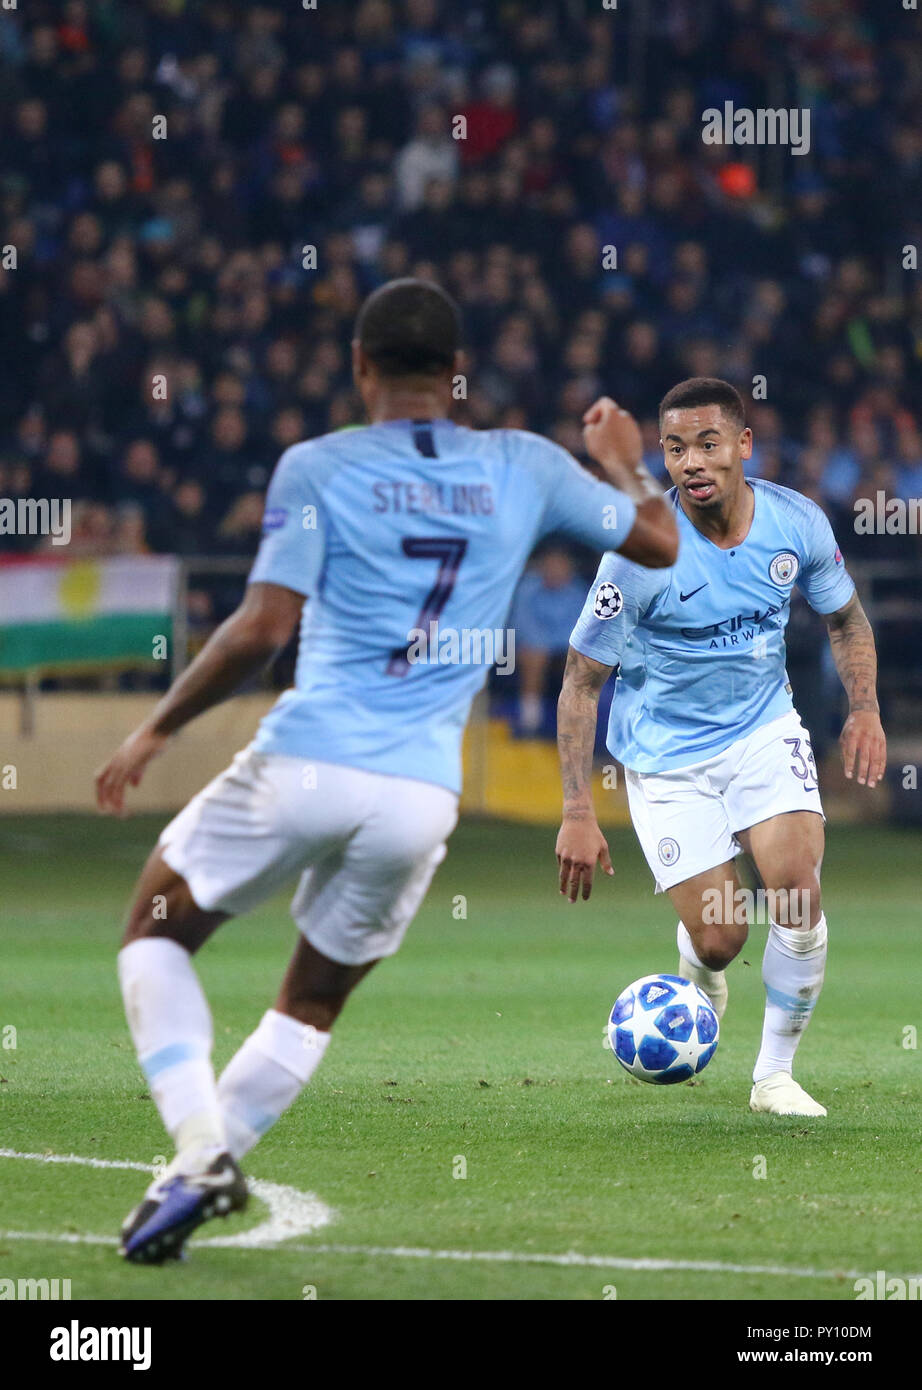 Kharkiv, Ukraine. 23rd October, 2018. Gabriel Jesus of Manchester City in action during the UEFA Champions League game against Shakhtar Donetsk at OSK Stock Photo